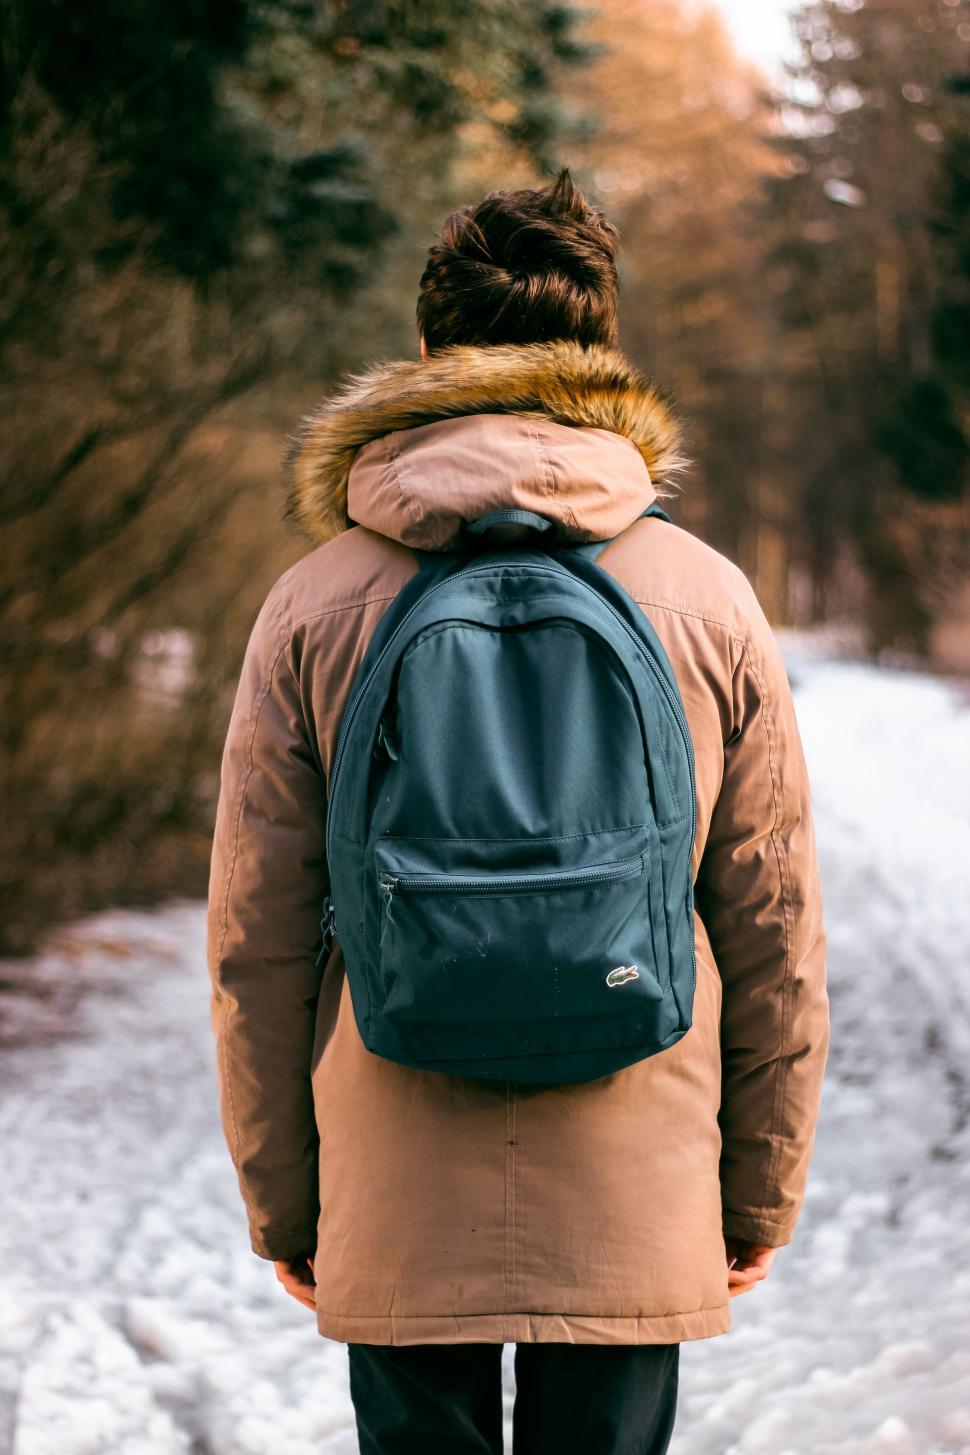 Free Image of Person Walking With Backpack in Snow 